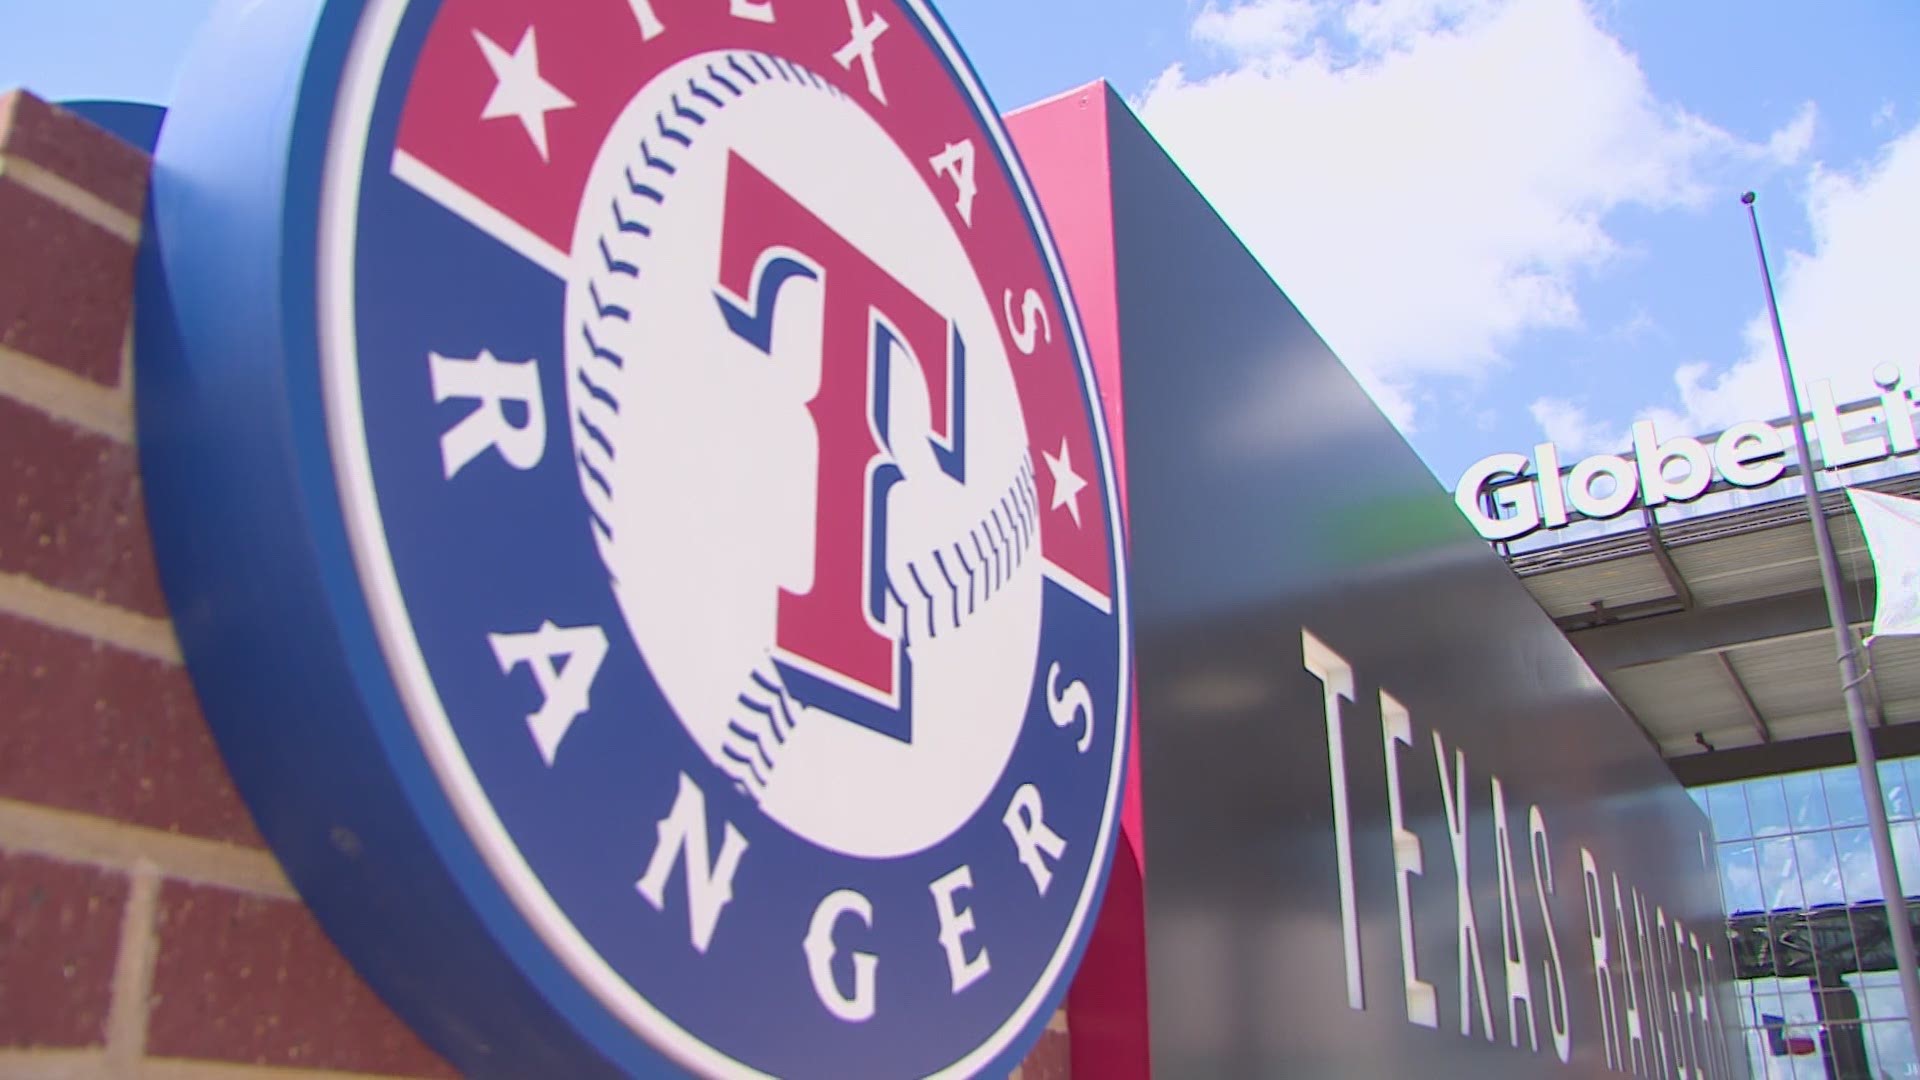 Rangers fans said they were excited to be back to see the new Globe Life Field stadium and get to see the first game of the 2021 season in person.